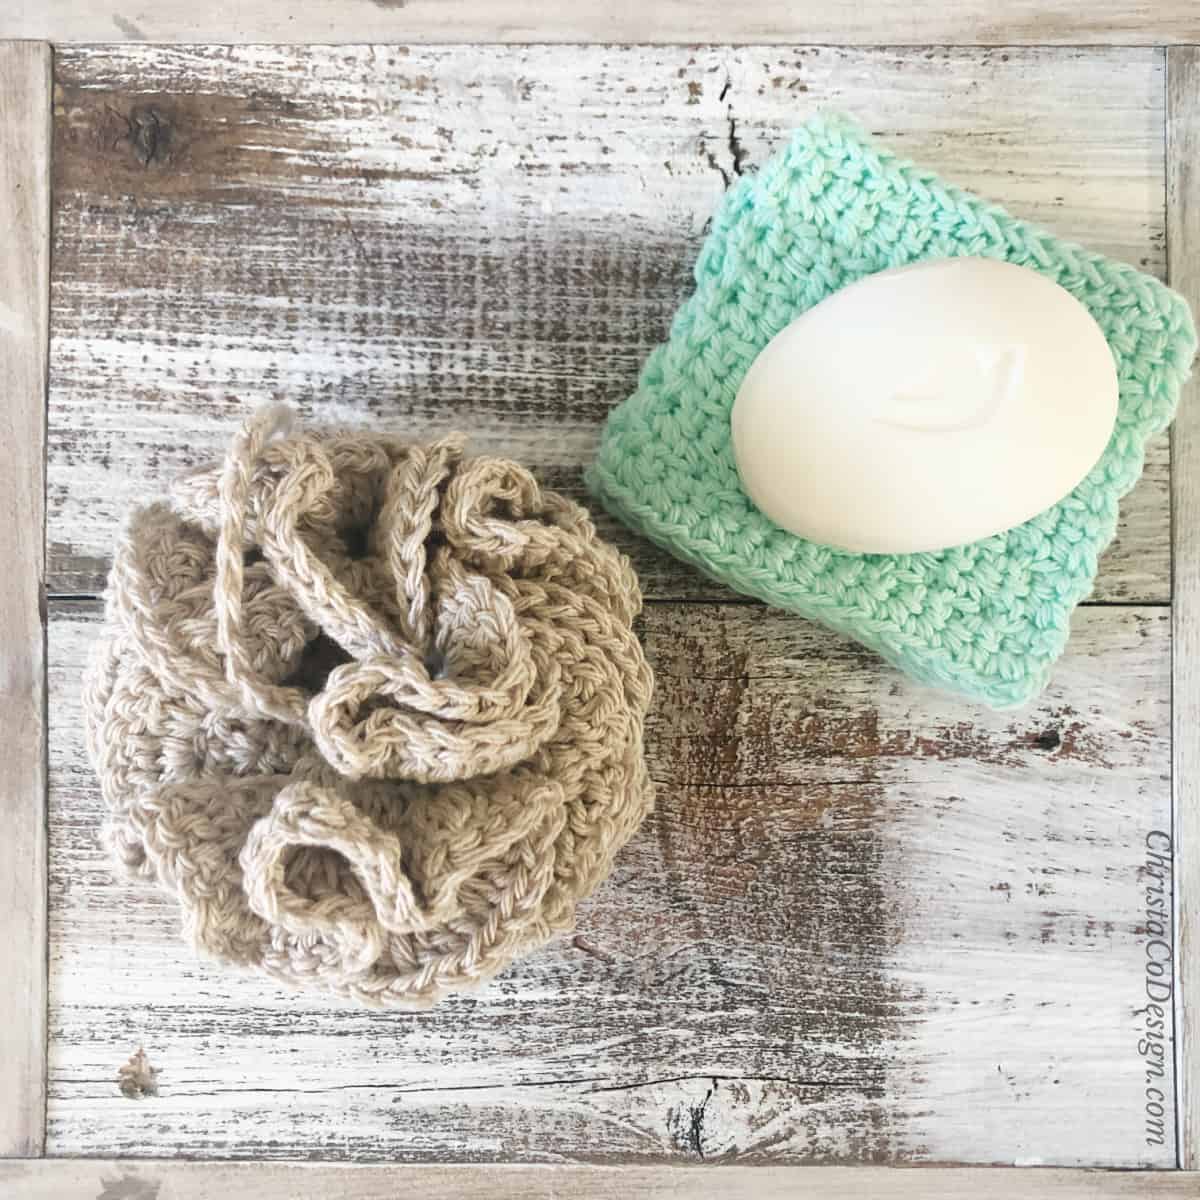 Crochet loofah and face scrubbies with bar soap.